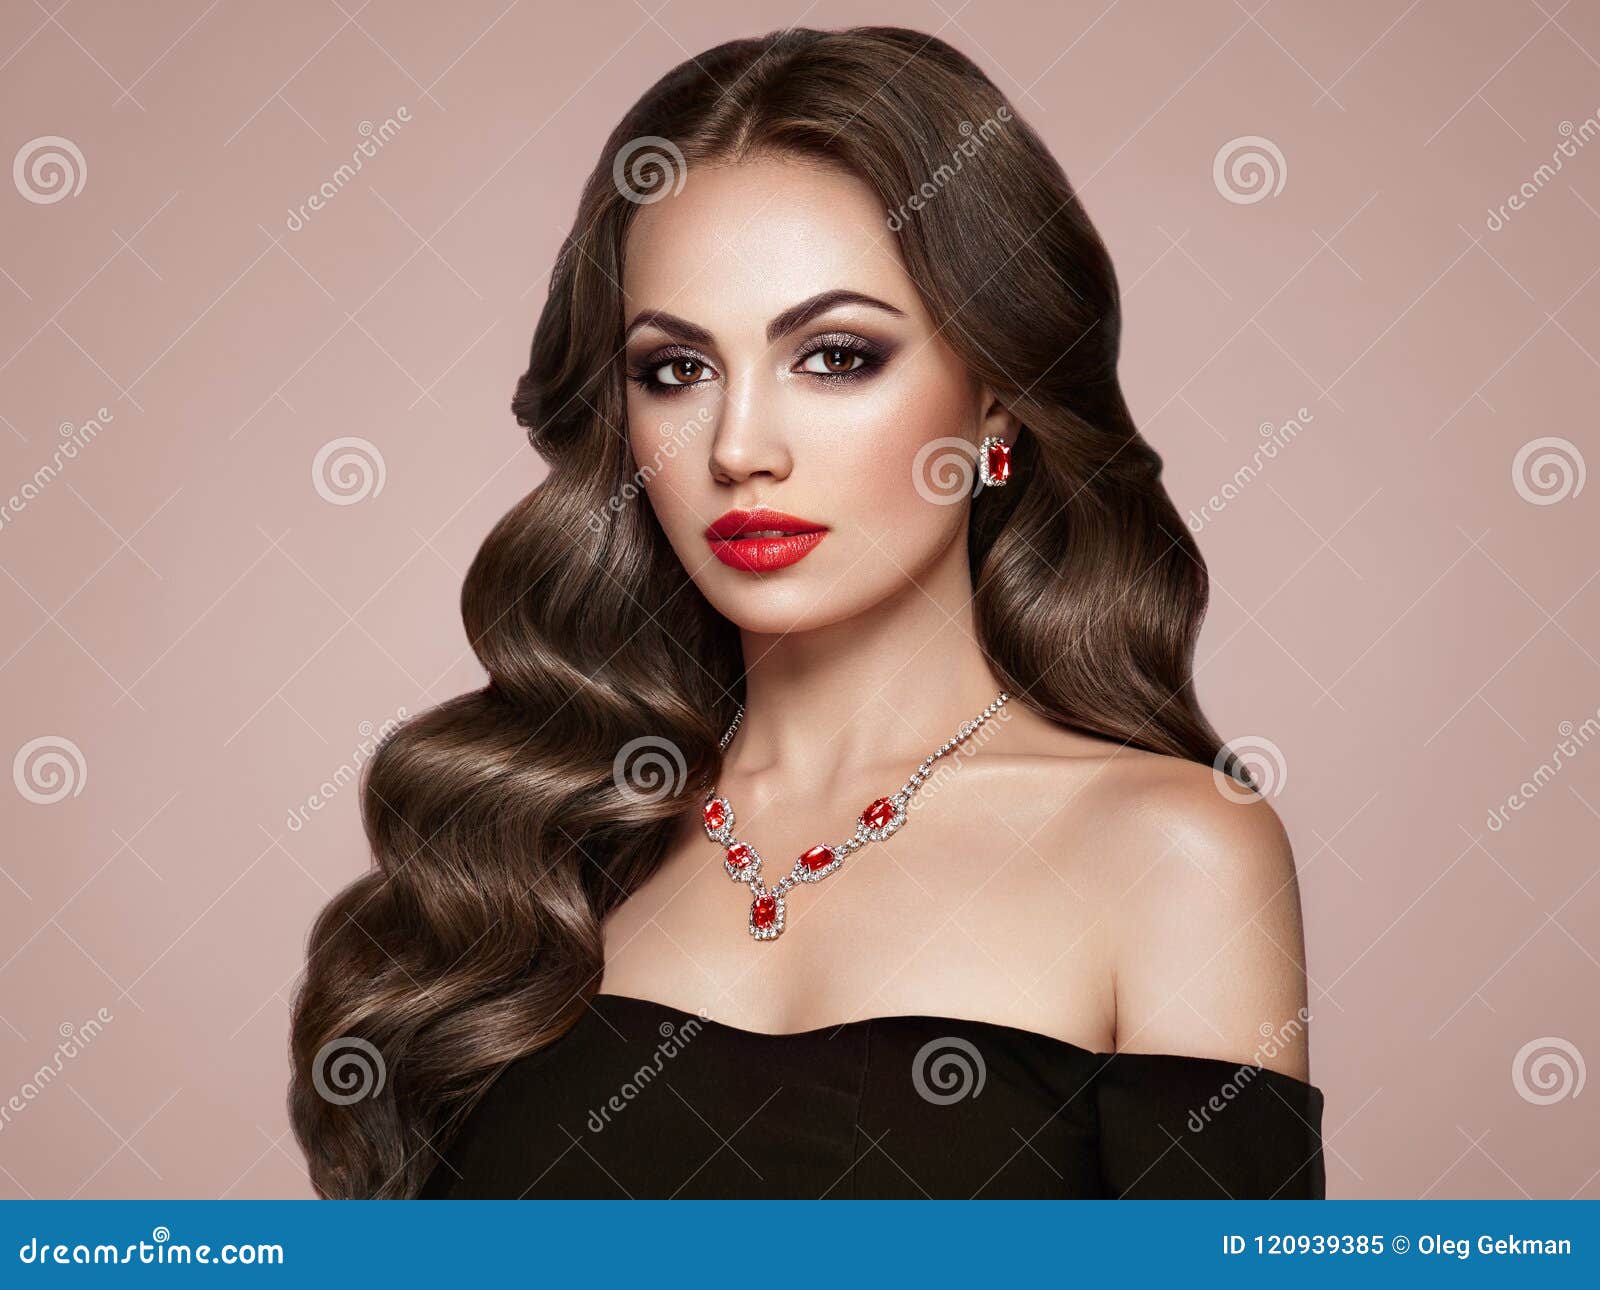 Brunette Woman With Curly Hair Stock Image Image Of Long Beauty 